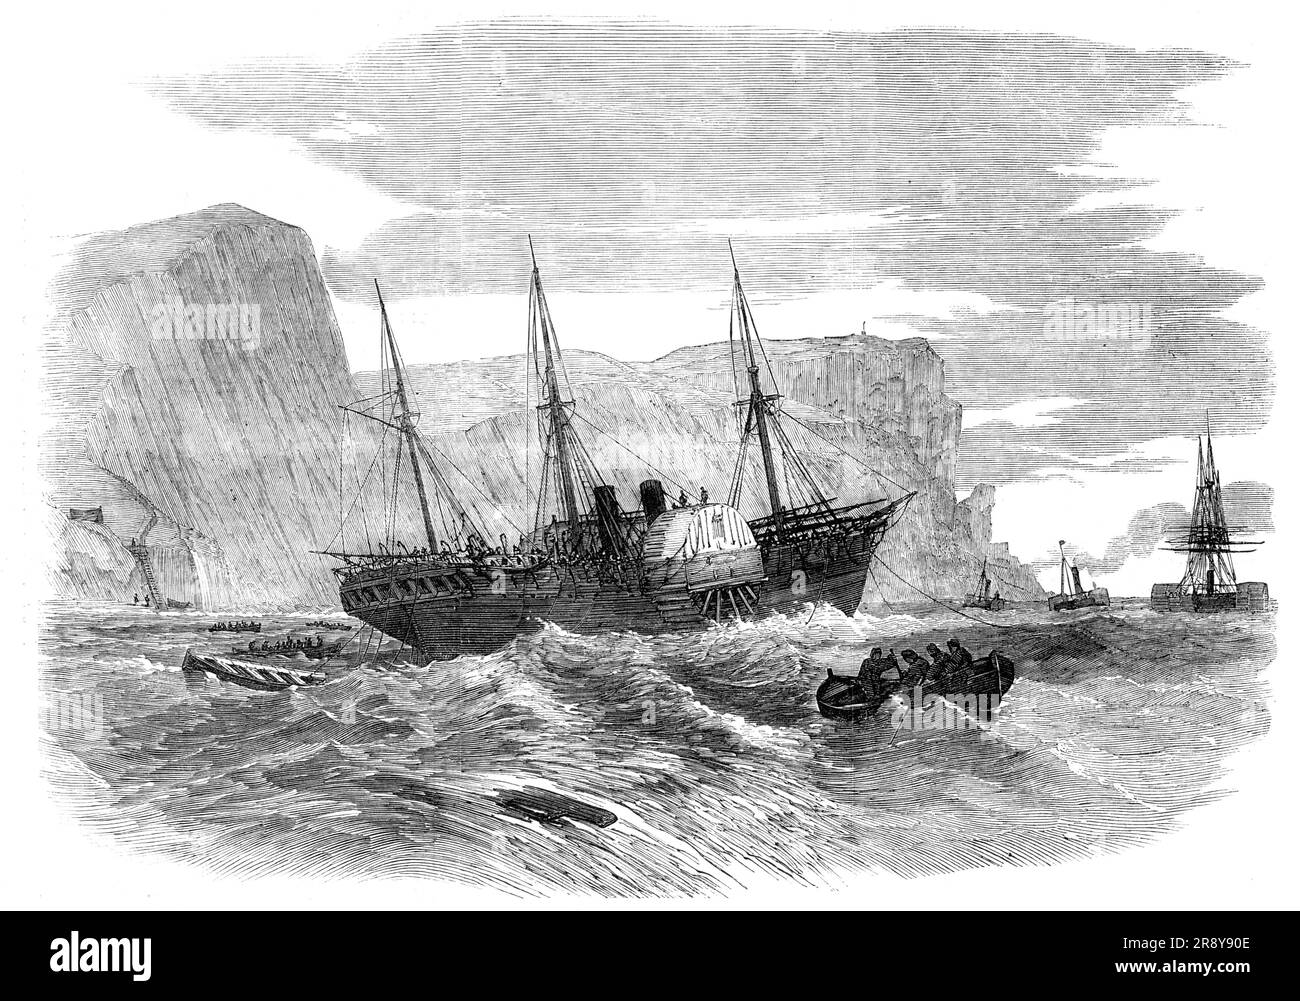 The Royal West India Mail Steamer &quot;Tyne&quot; on shore at St. Alban's Head, 1857. '...the Brazilian mail steam-ship Tyne, on her homeward voyage, ran aground on the Isle of Purbeck. The whole of the passengers were landed in safety...Shortly after she struck, getting a little more east, into deeper water, she swung round, and very happily for those on board came head to wind, by which the force of the waves was separated as it were by the bows of the ship. Her lights and signals having been seen, some of the boats of the coast-guard from Kimmeridge, St. Alban's, and Bottom put off, and th Stock Photo